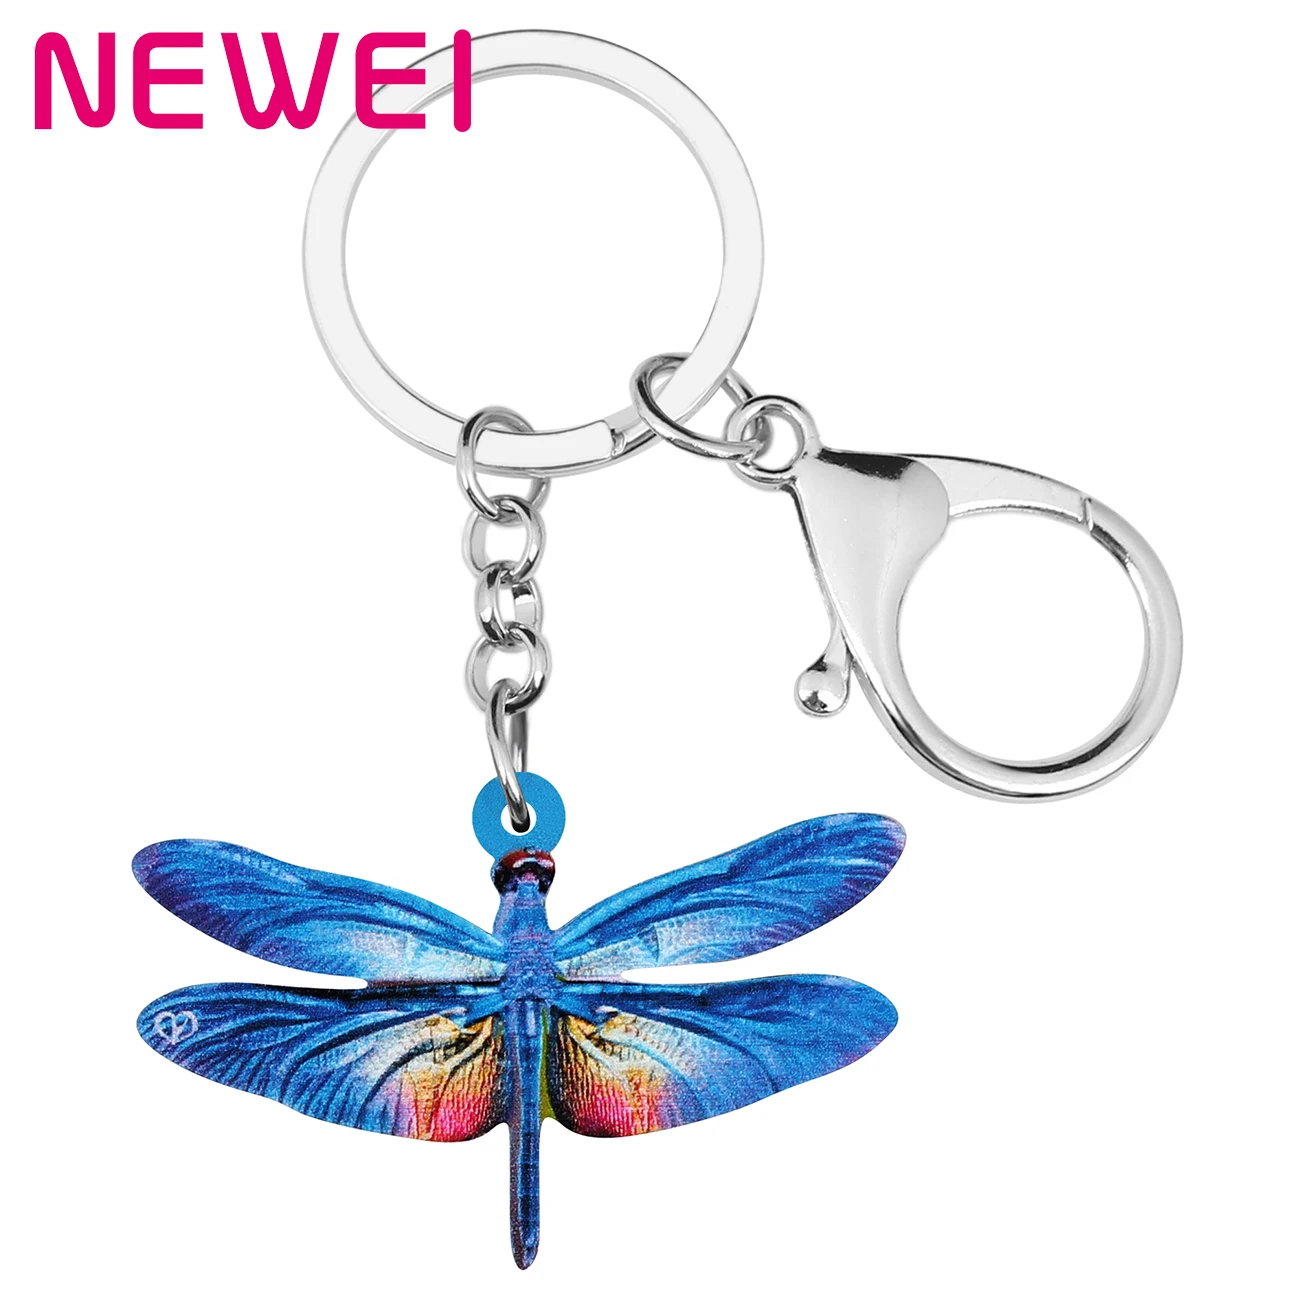 

Newei Acrylic Blue Dragonfly Keychains Print Cute Insect Animal Keyring Jewelry For Women Kids Teens Funny Gift Charms Jewellery